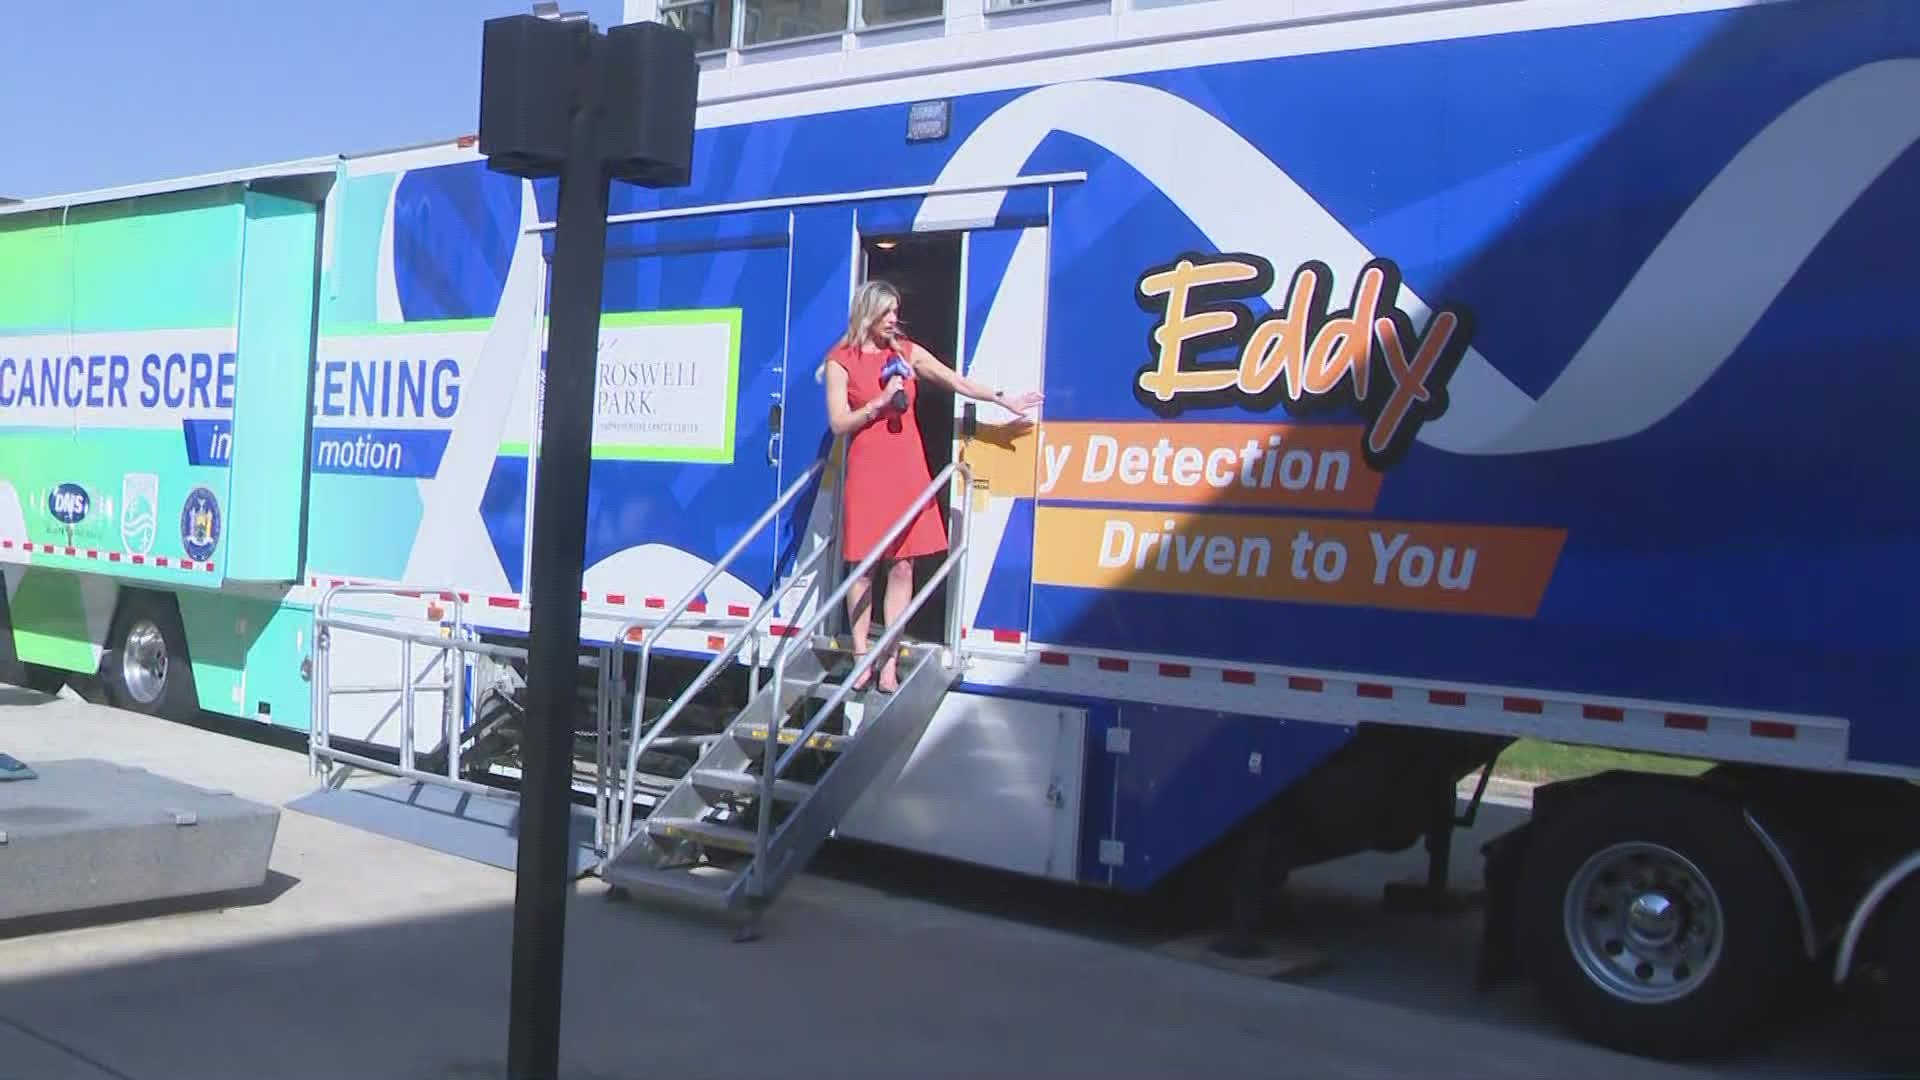 IT'S CALLED EDDY - AND IT'S A MOBILE LUNG CANCER SCREENING UNIT...